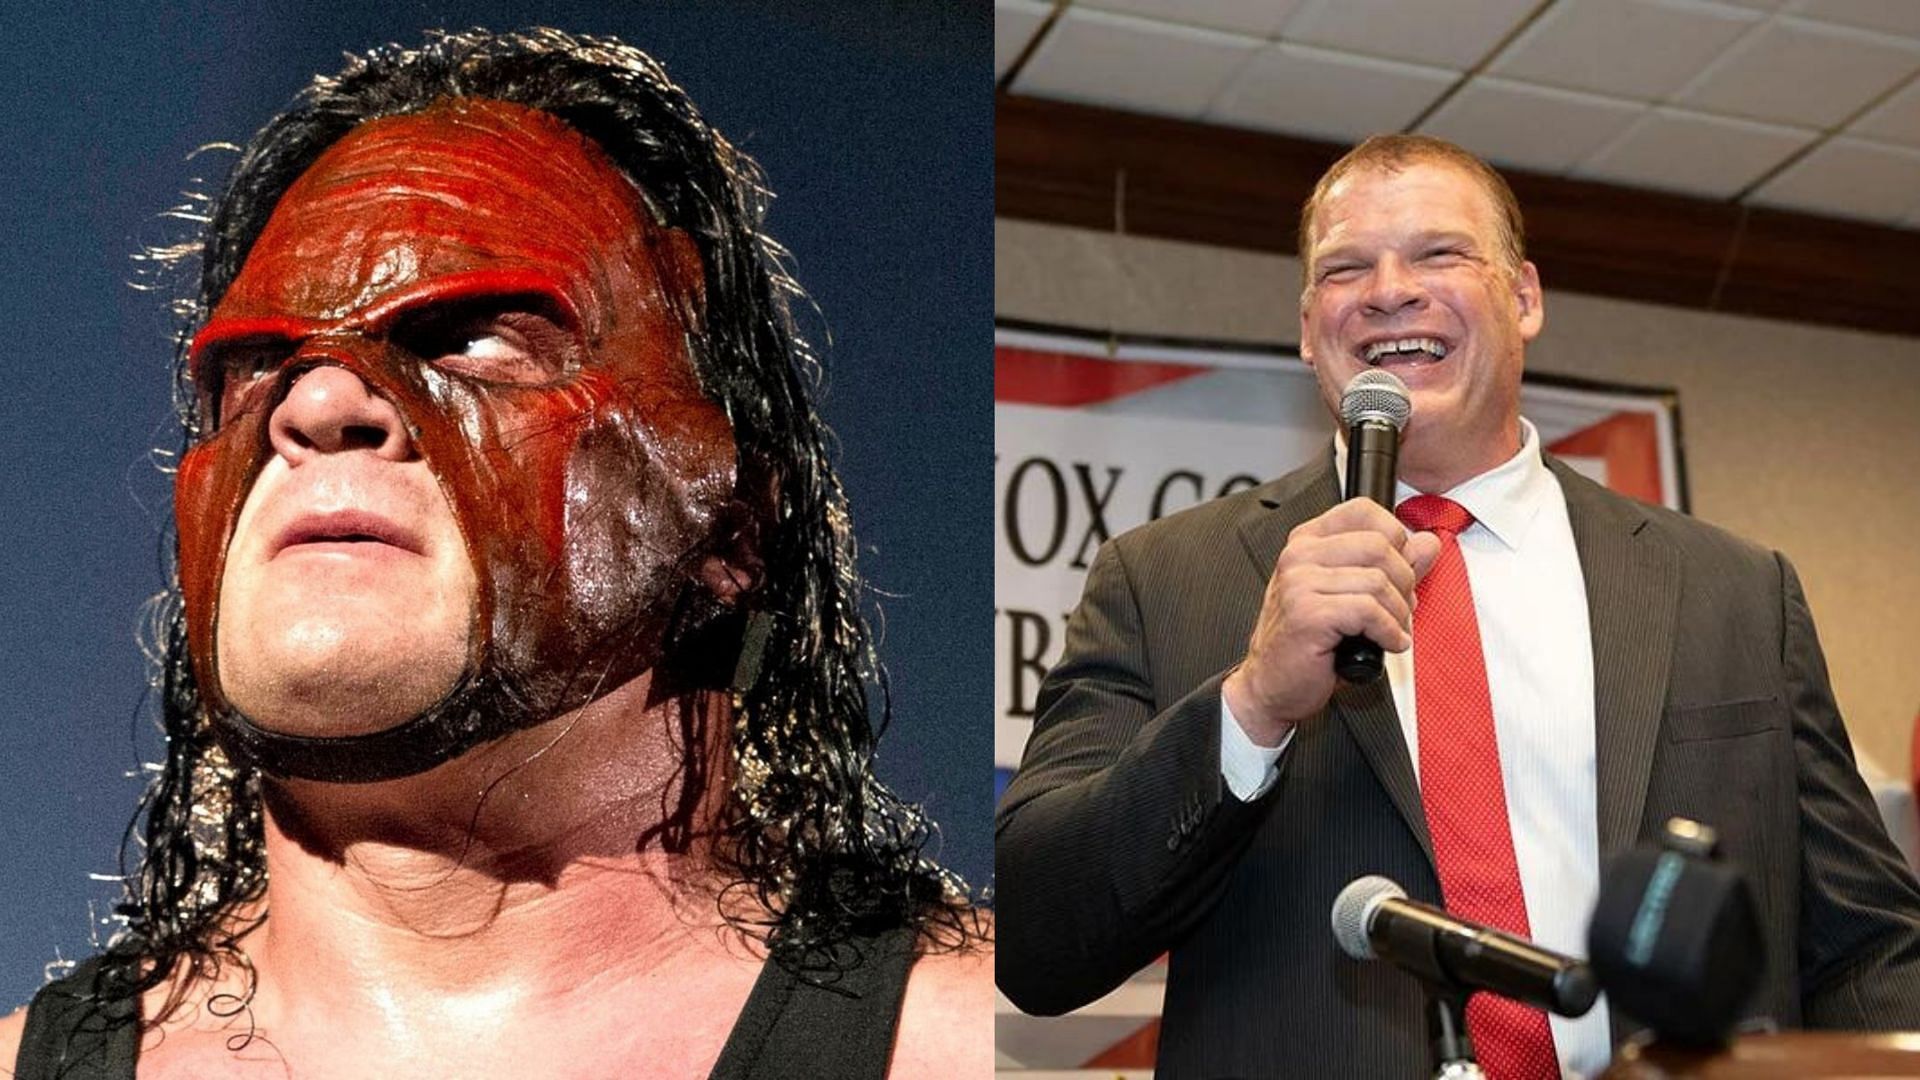 Kane retires from WWE for another venture